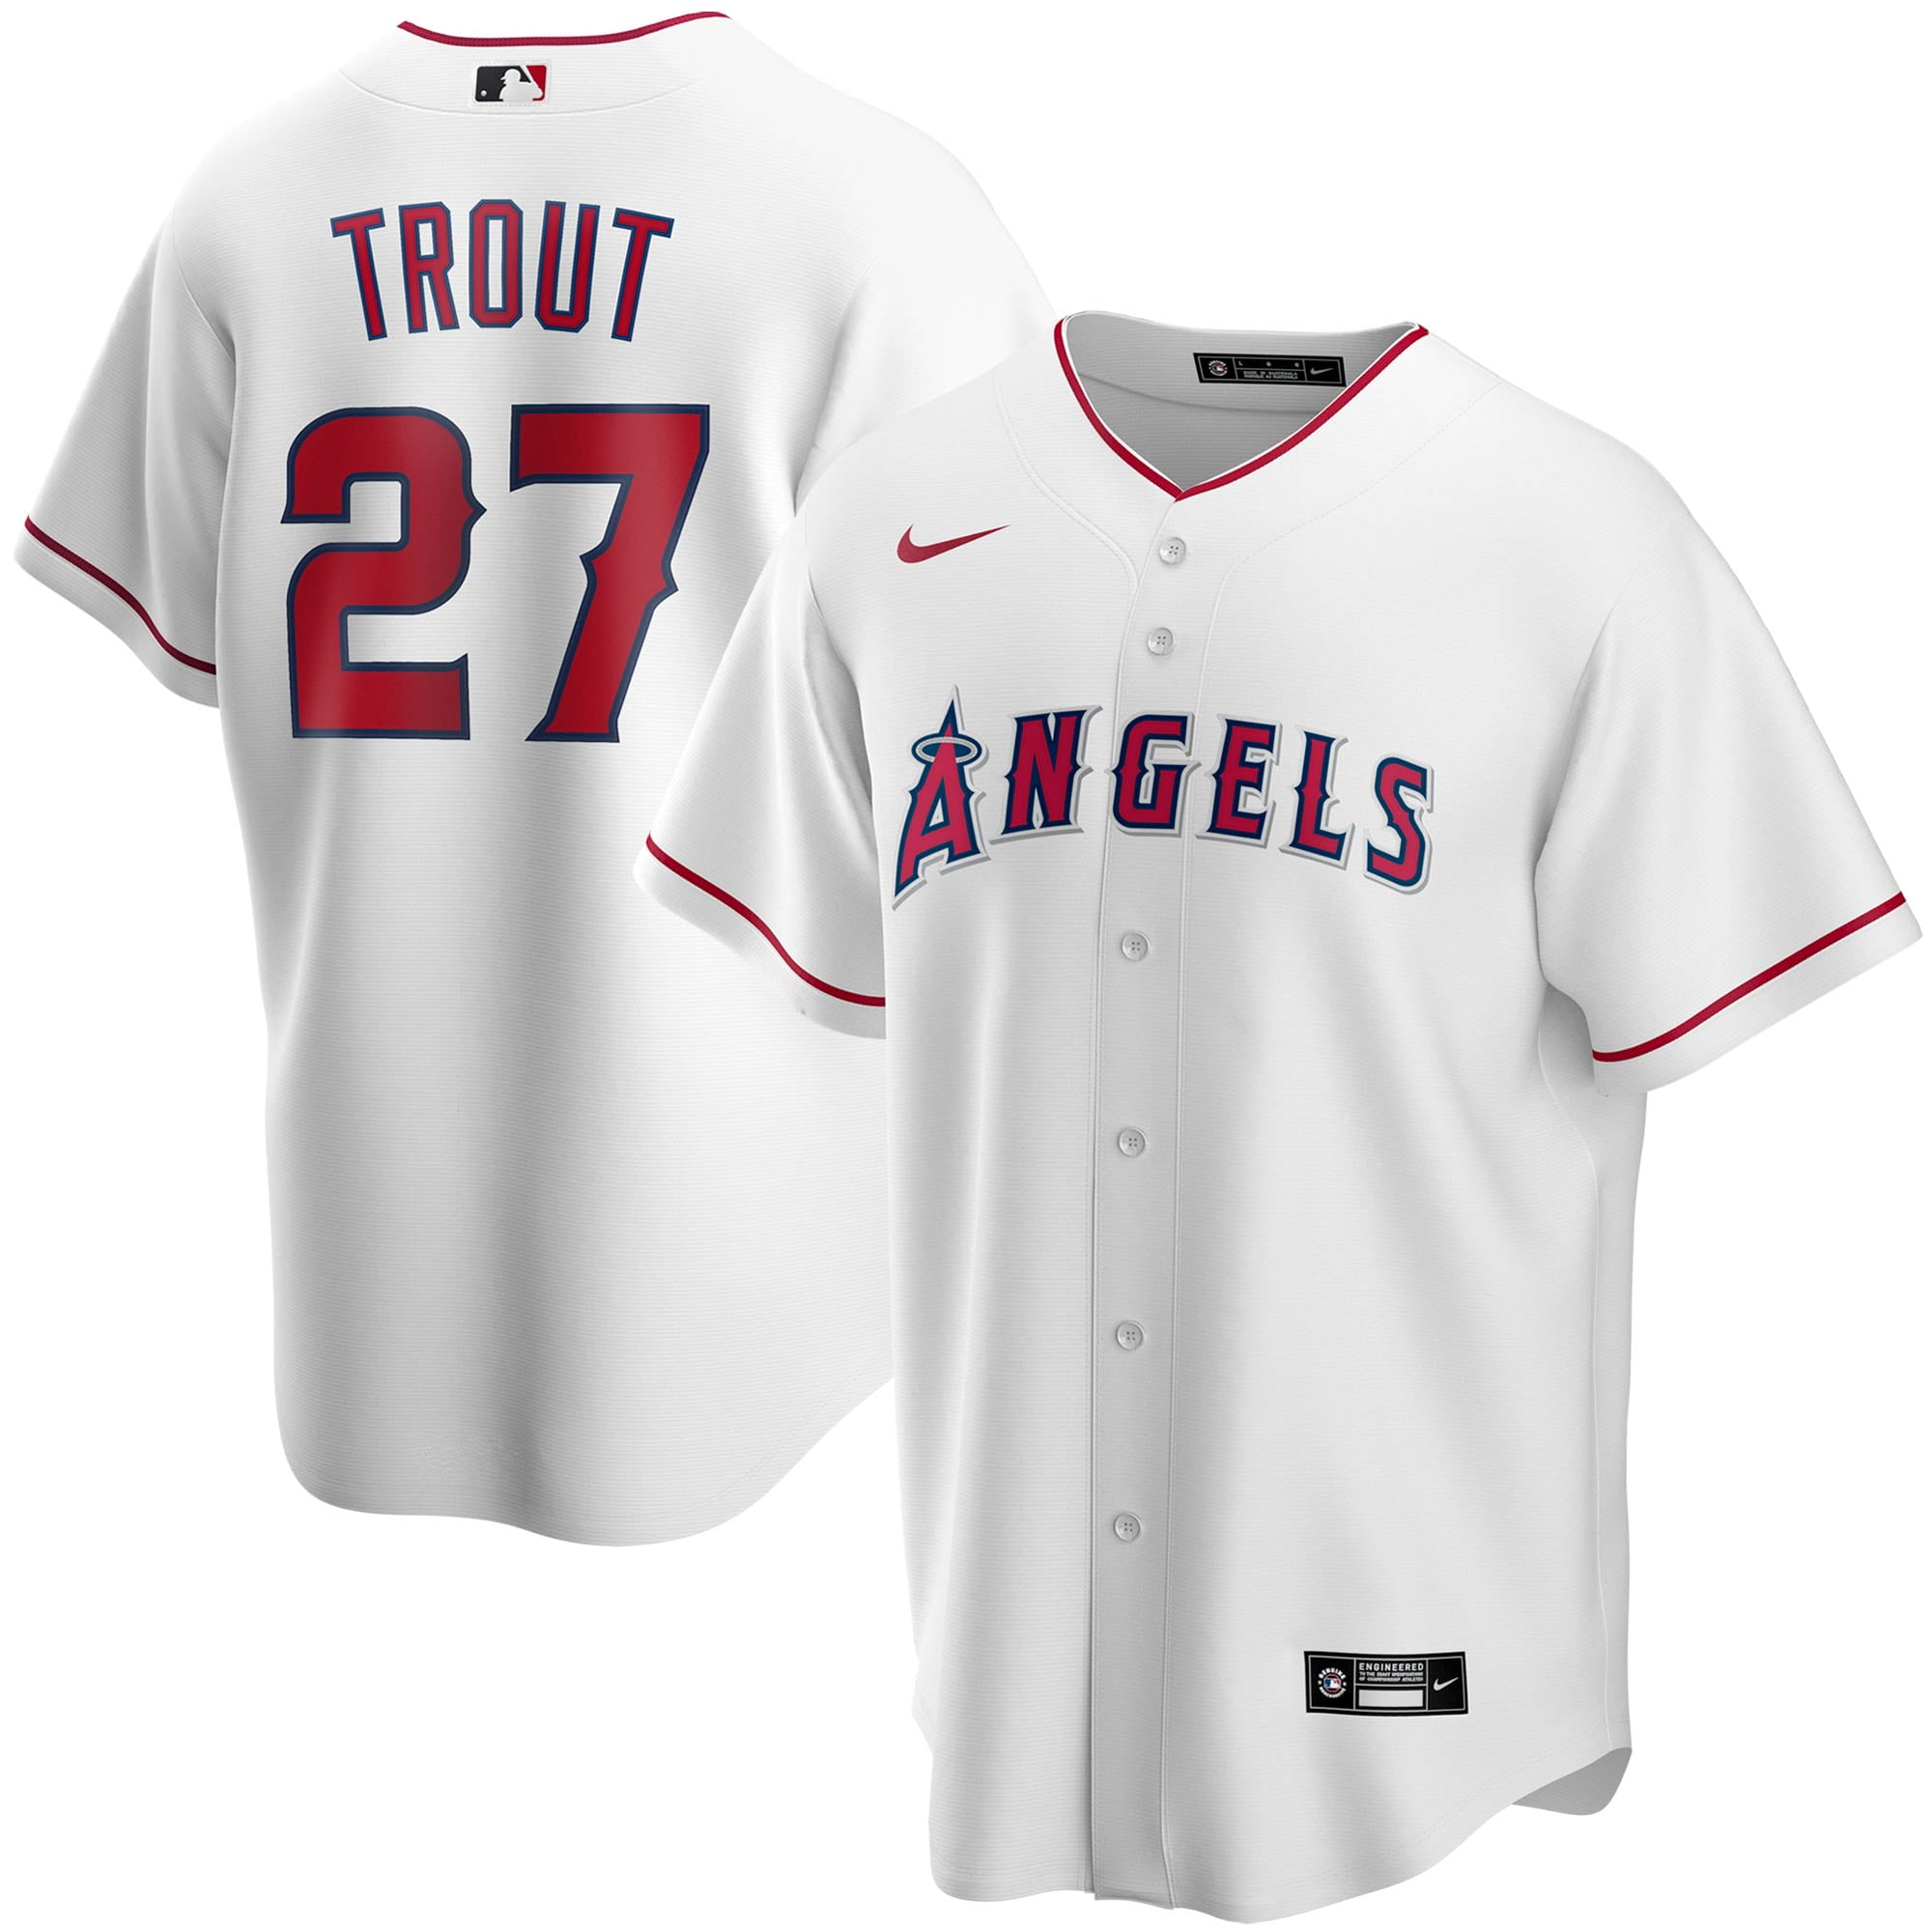 angels white jersey